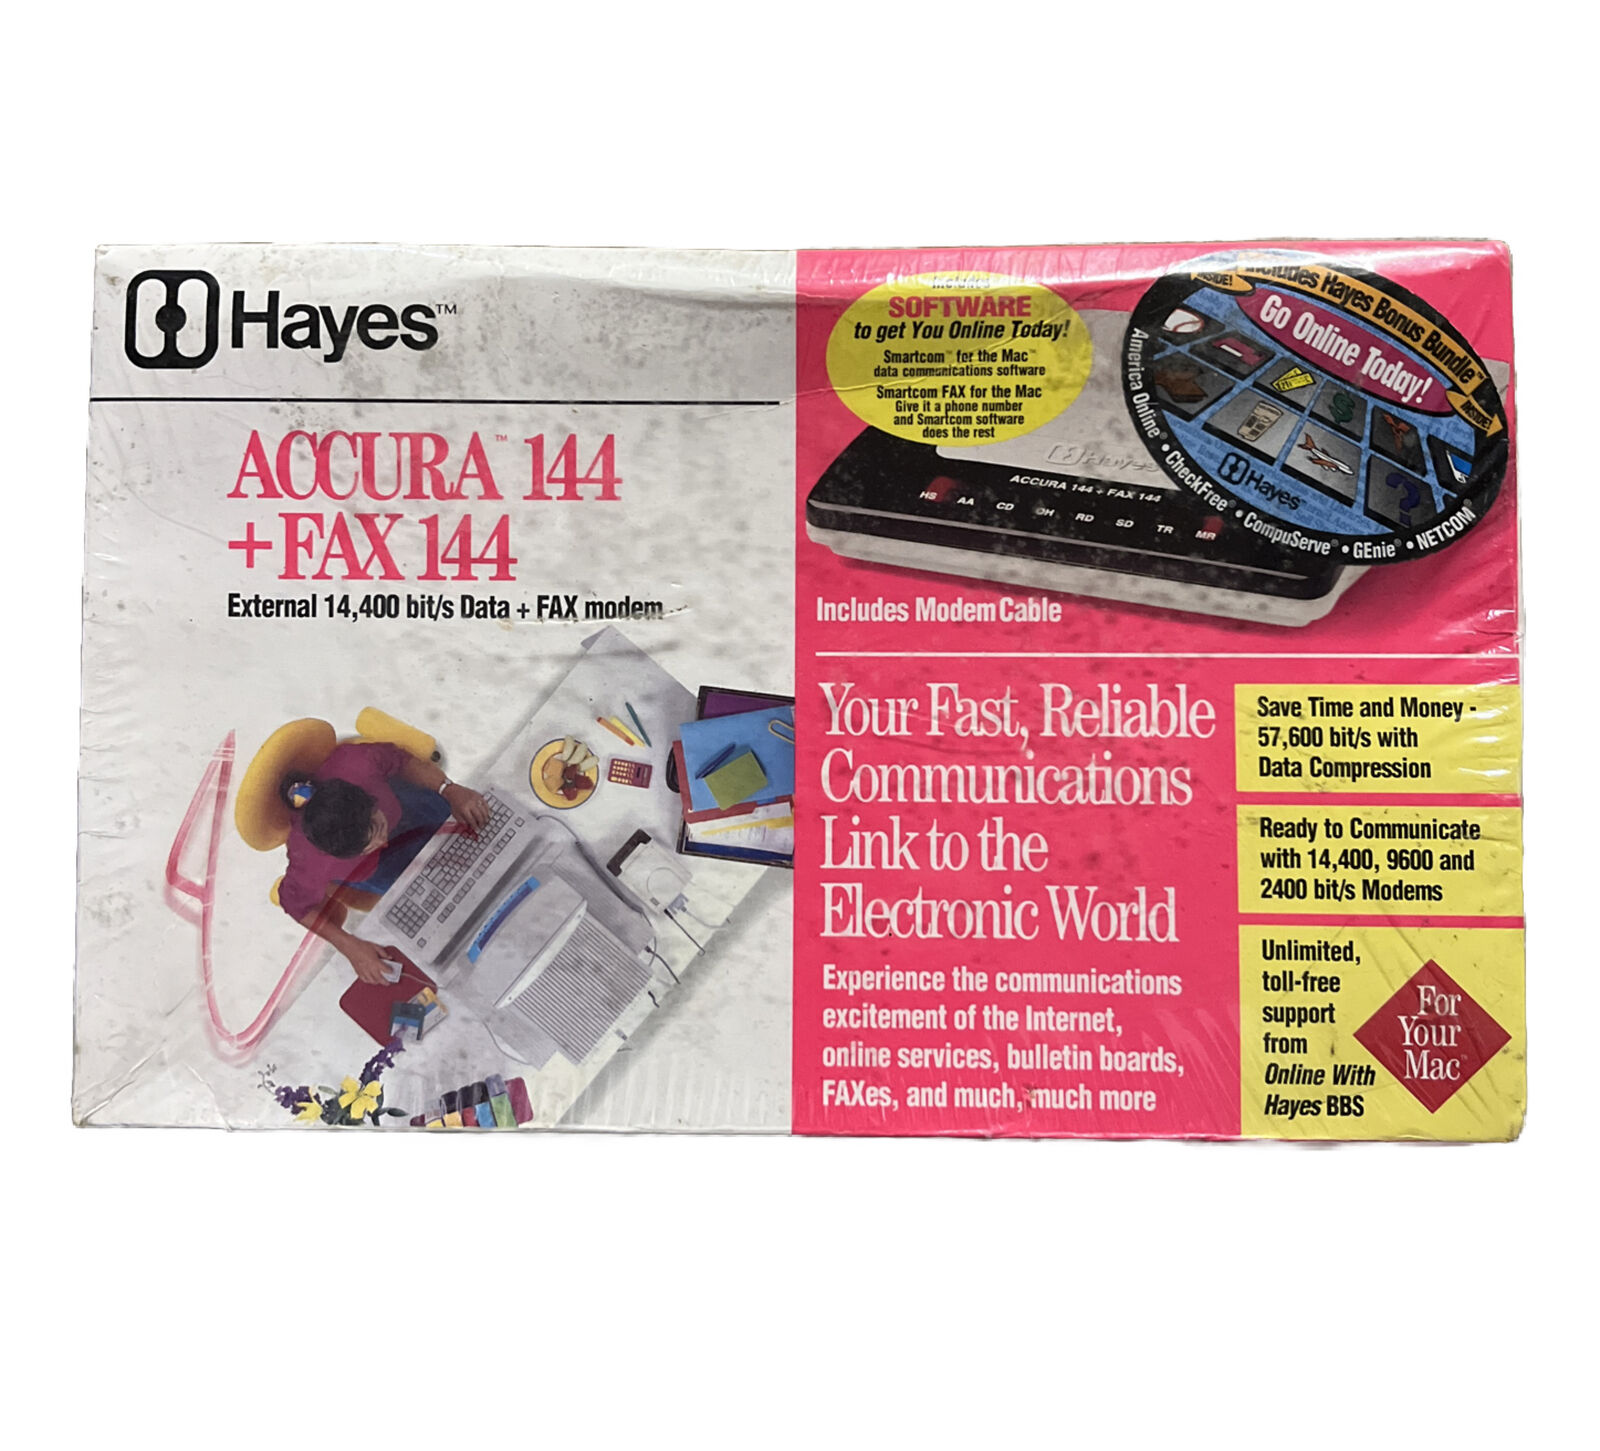 1995 Hayes ACCURA 144 + FAX 144 External Modem 5300AM For PC Brand New Sealed